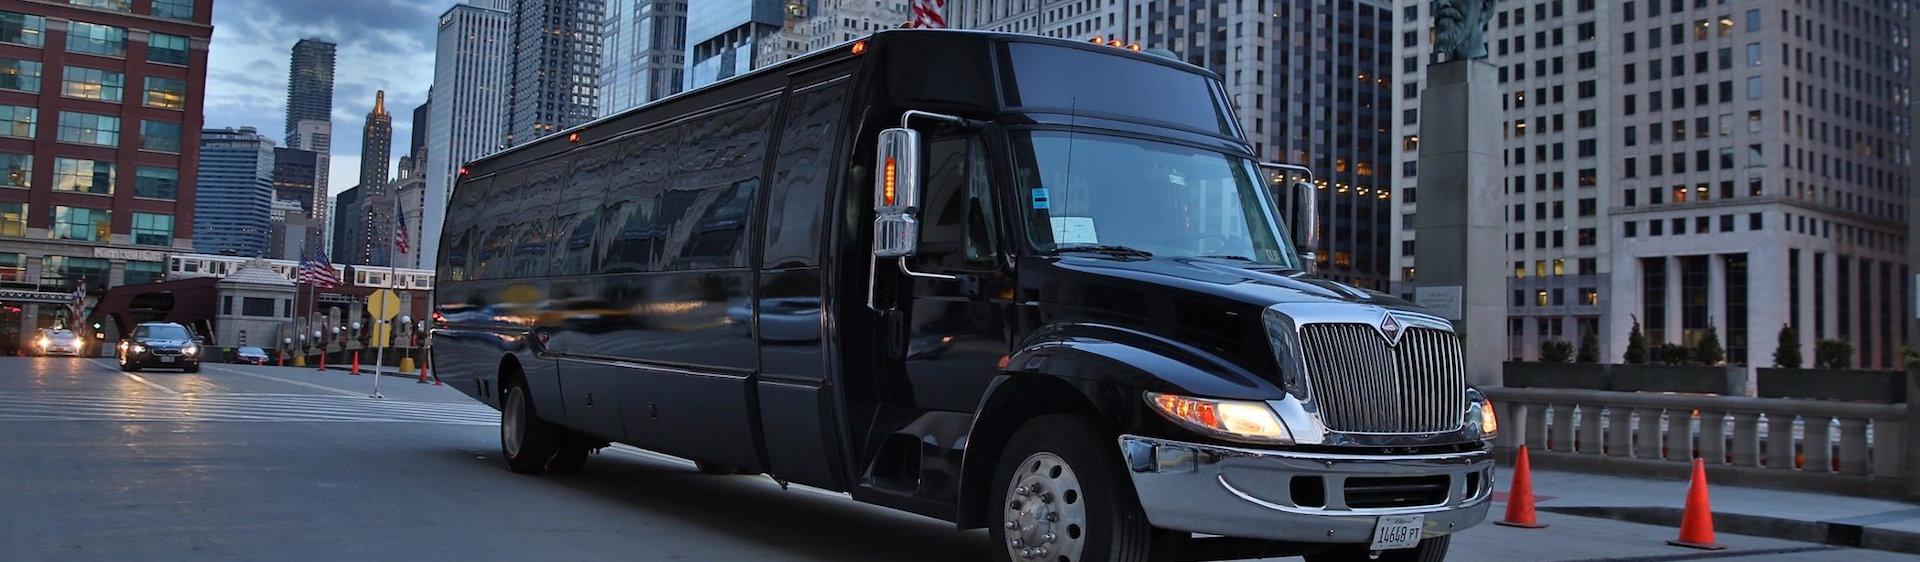 Party Bus Rental Company Chicago IL